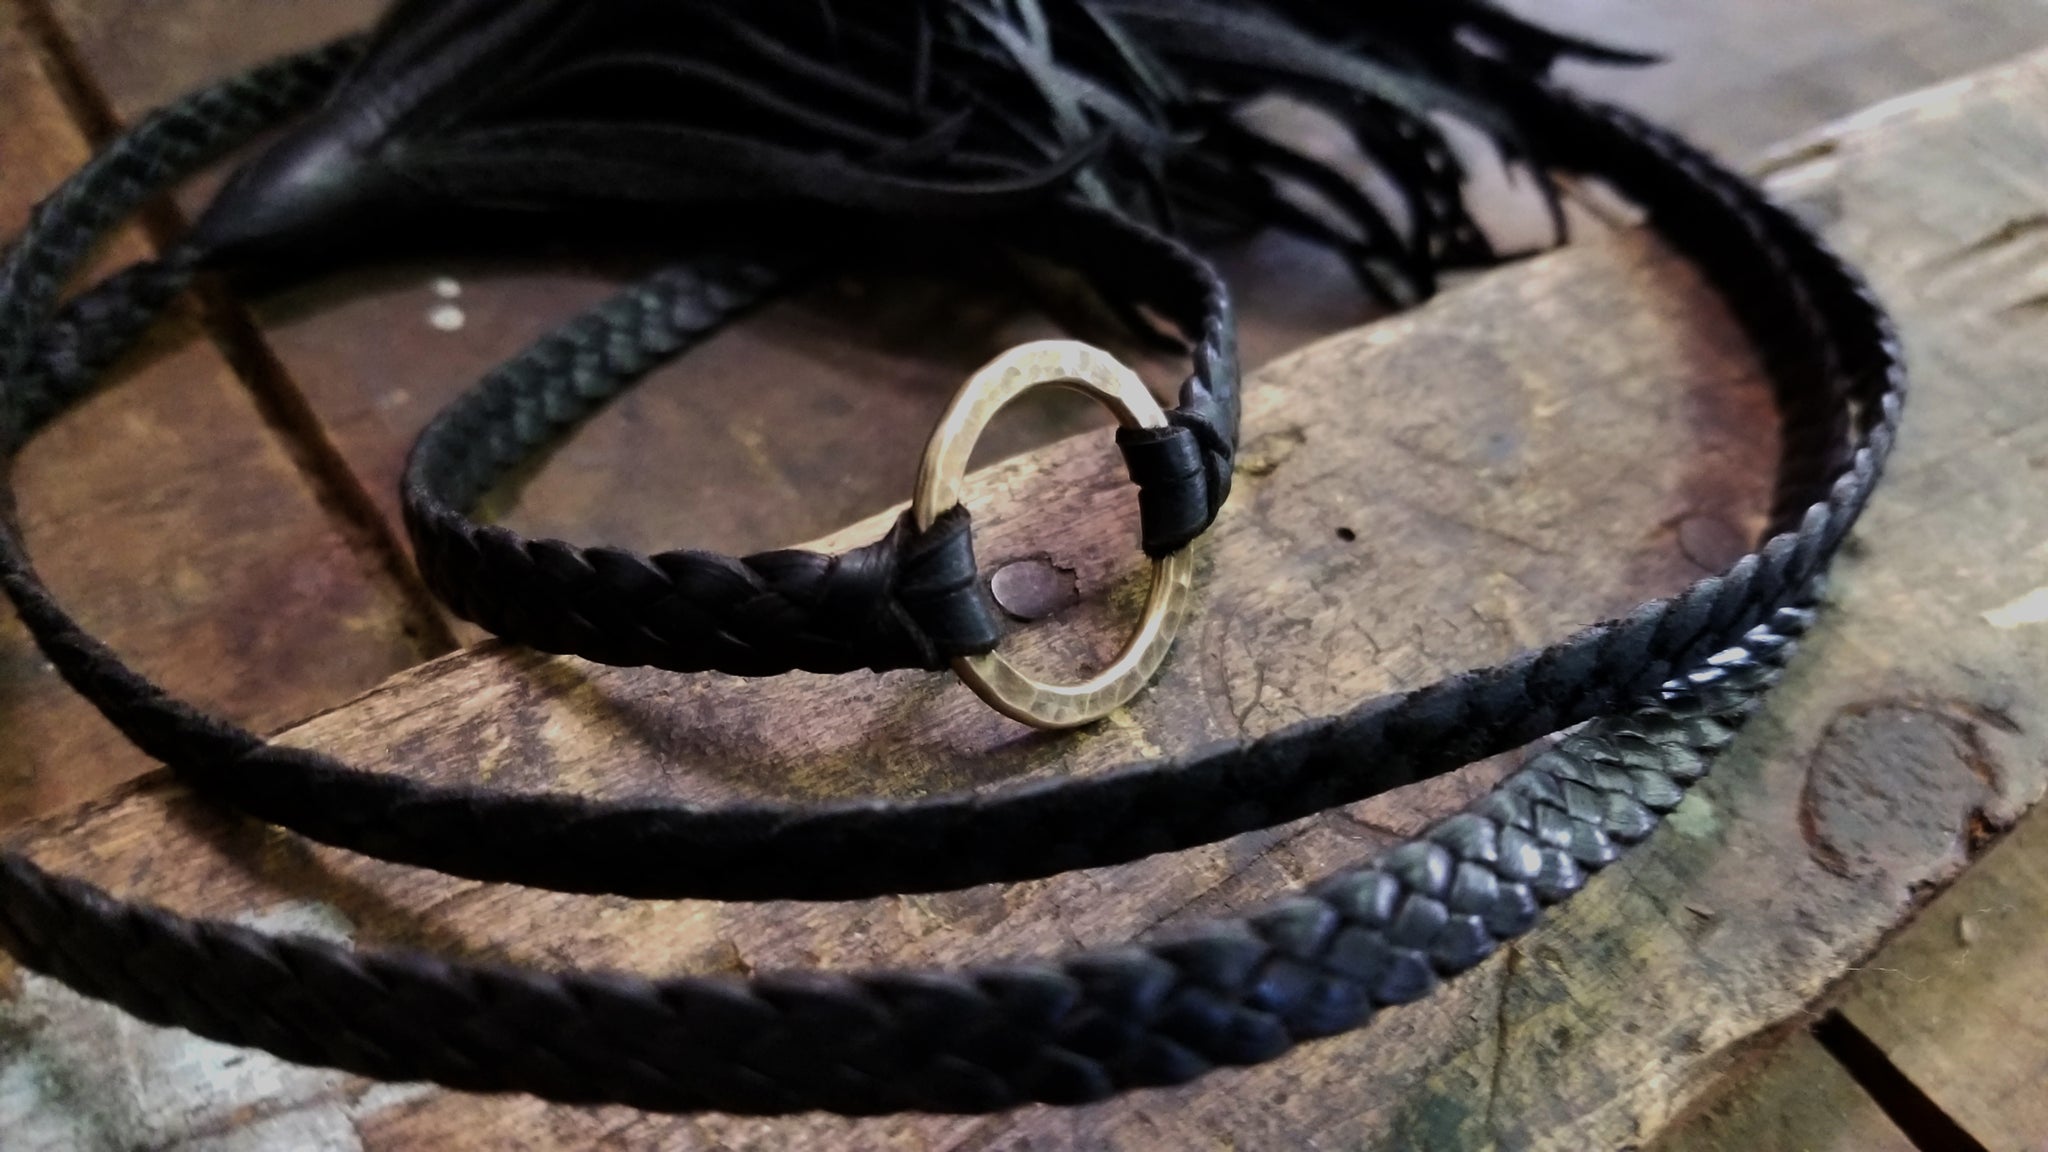 Zyanya Ring Braided Leather Choker Necklace/Wrap Bracelet, black eternity necklace with antique nickel ring